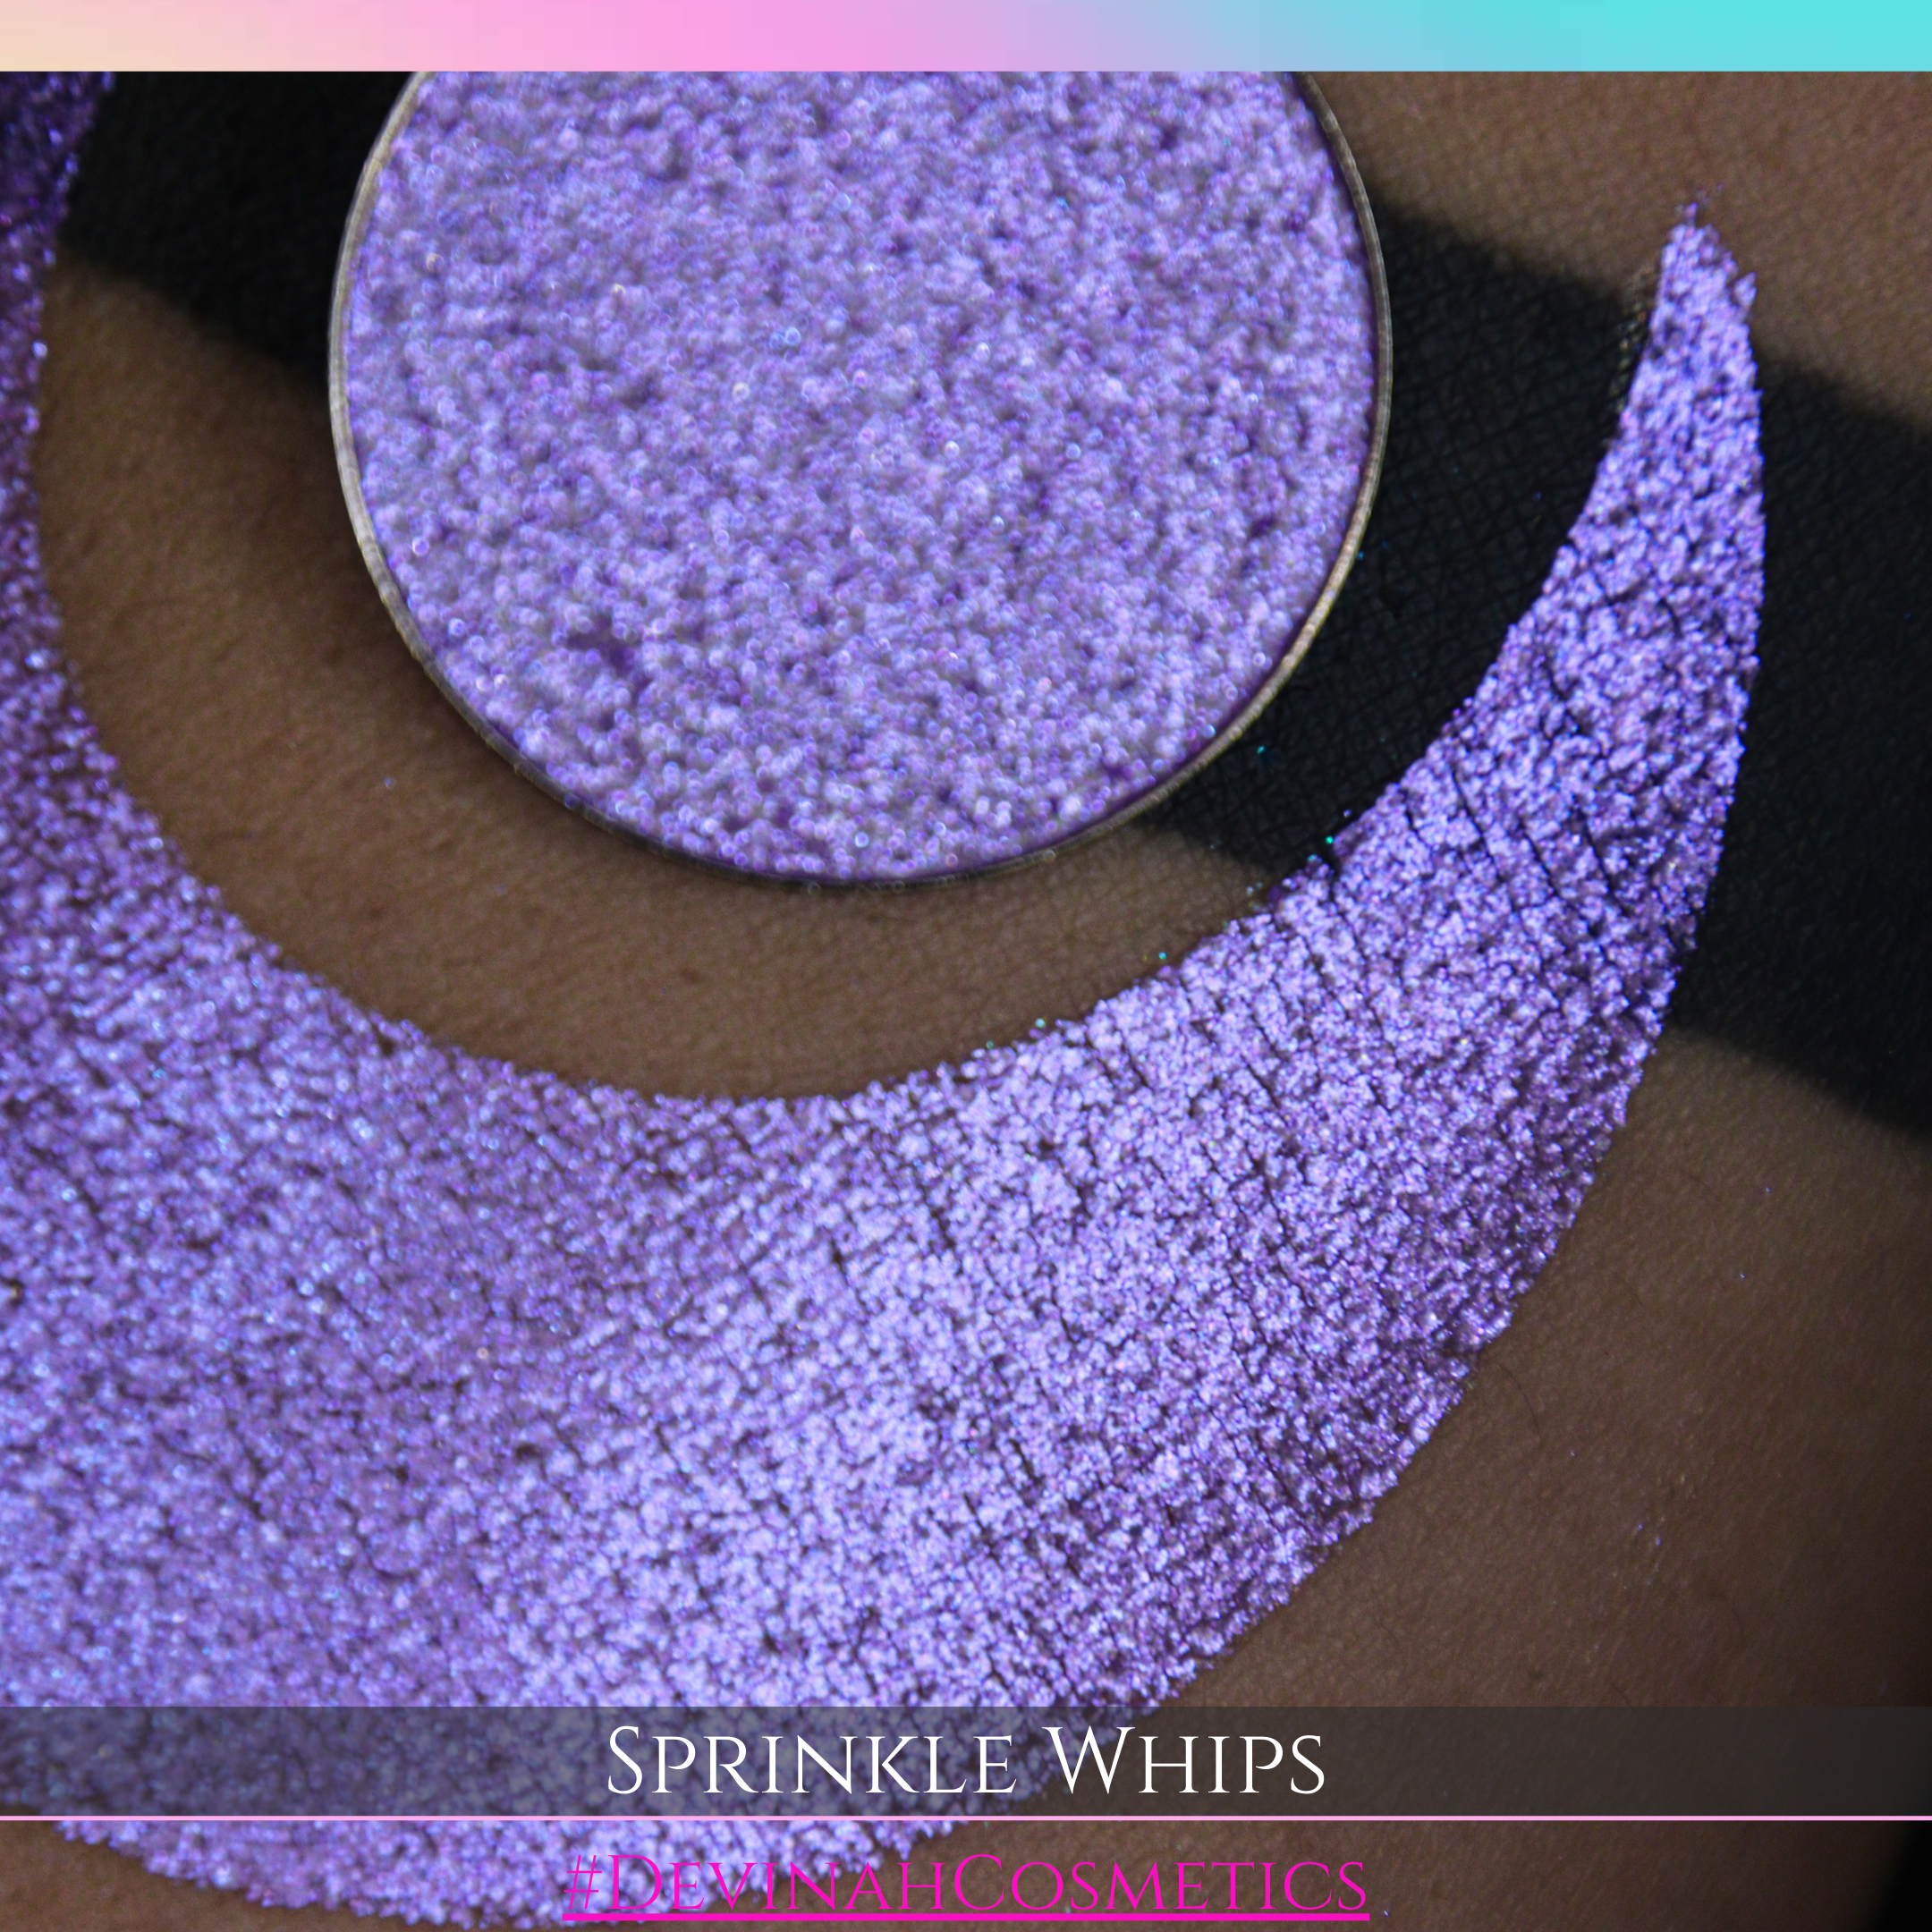 SPRINKLE WHIPS Pressed Pigment